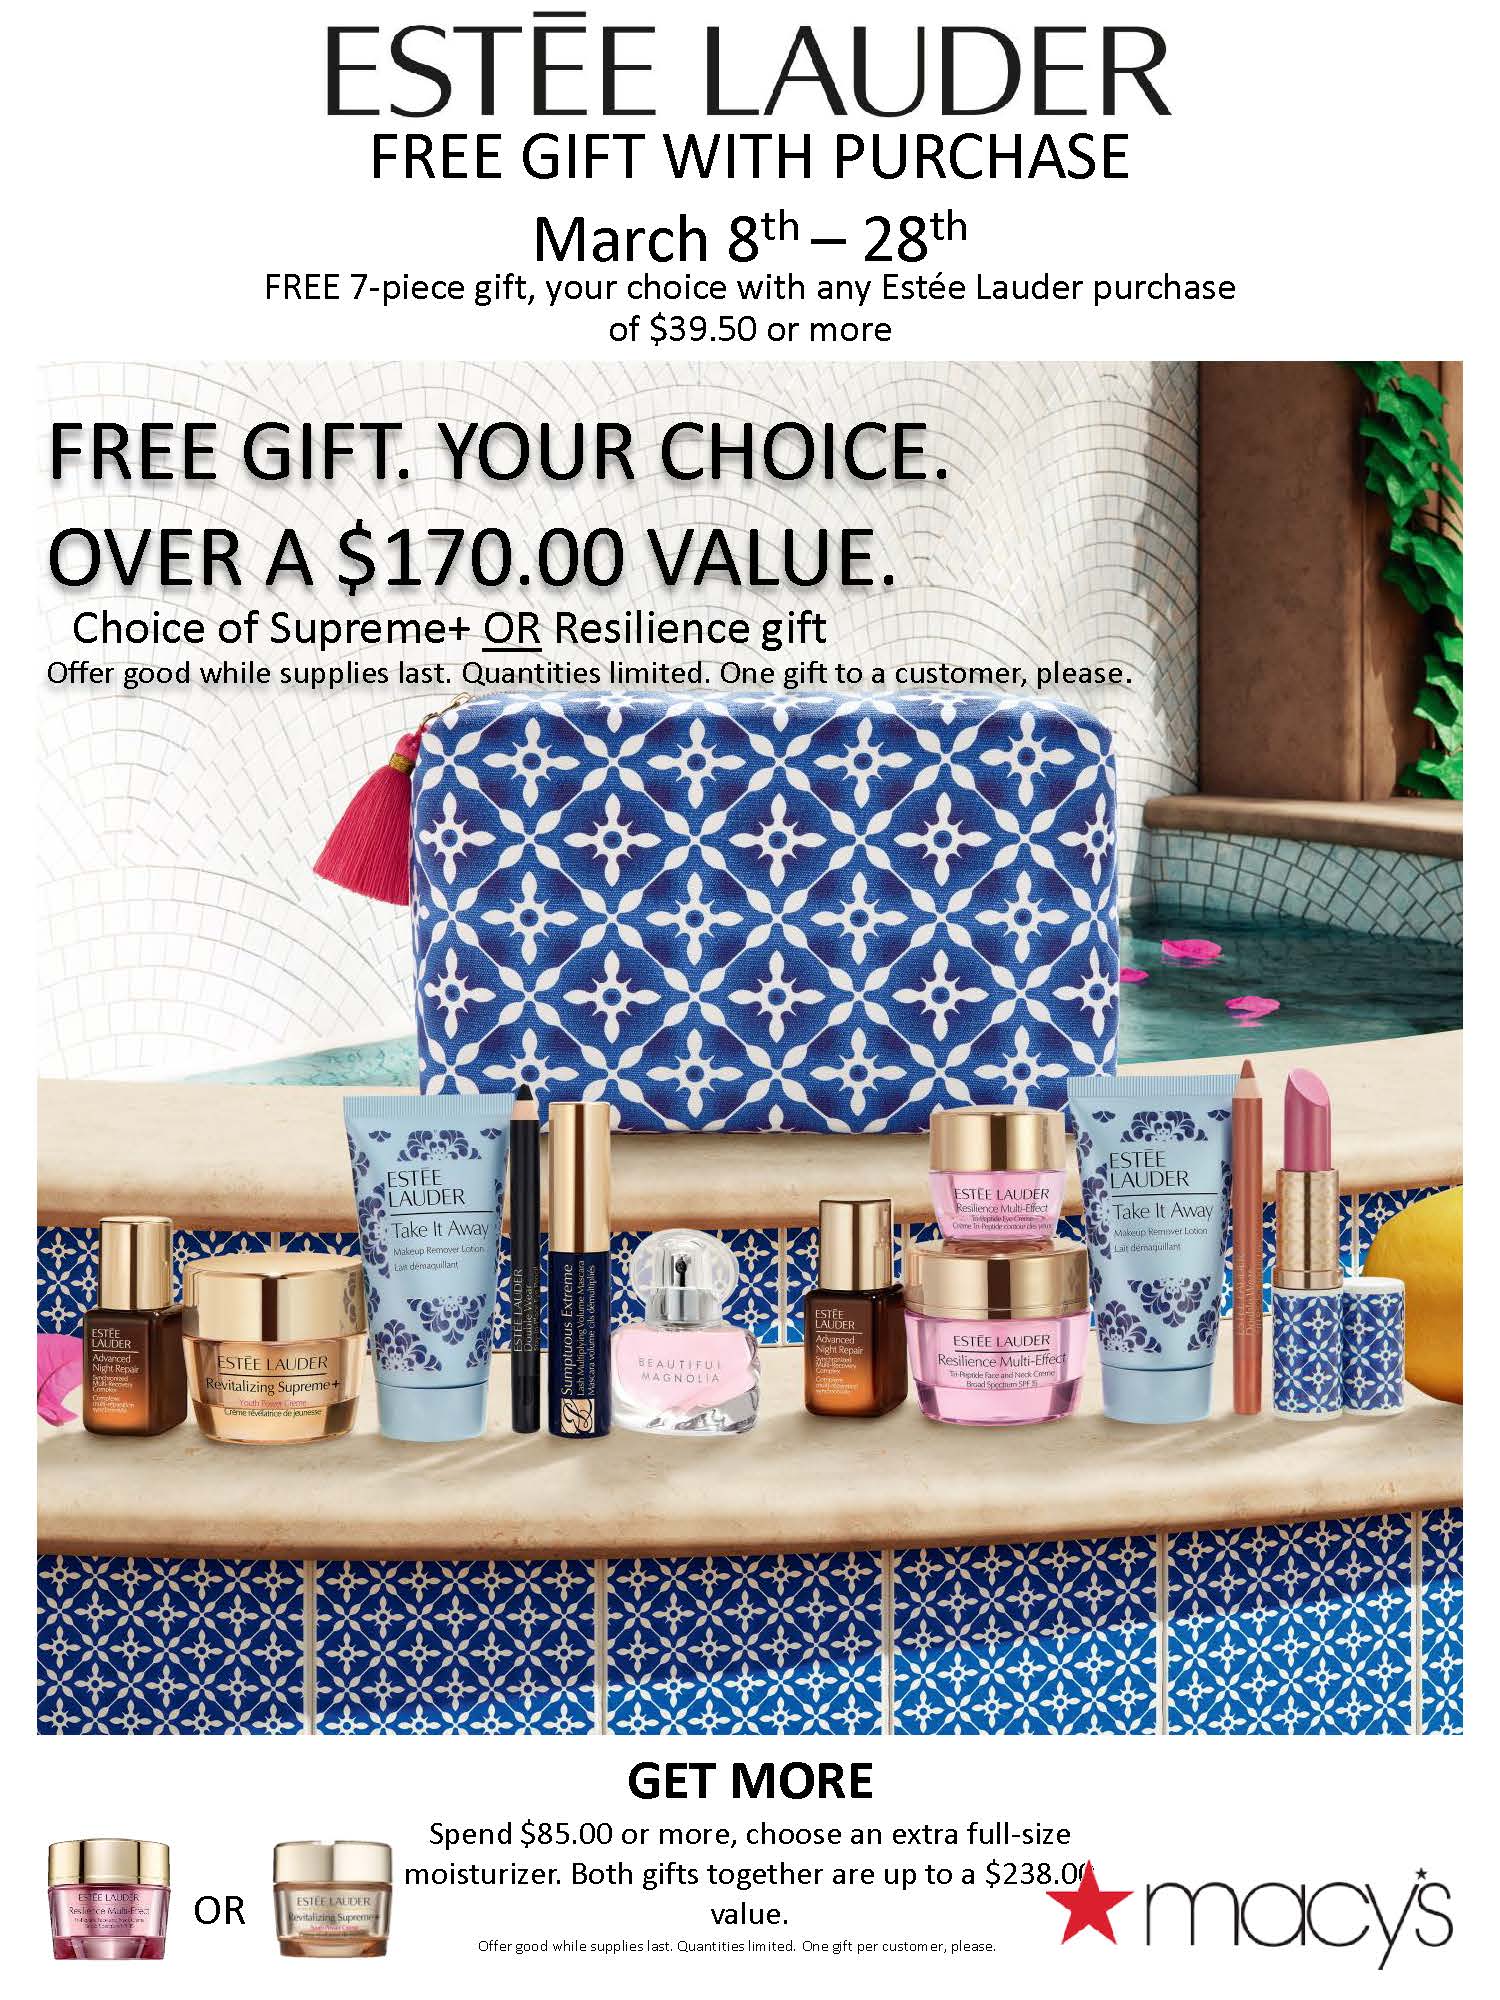 Estee Lauder Free Gift with Purchase